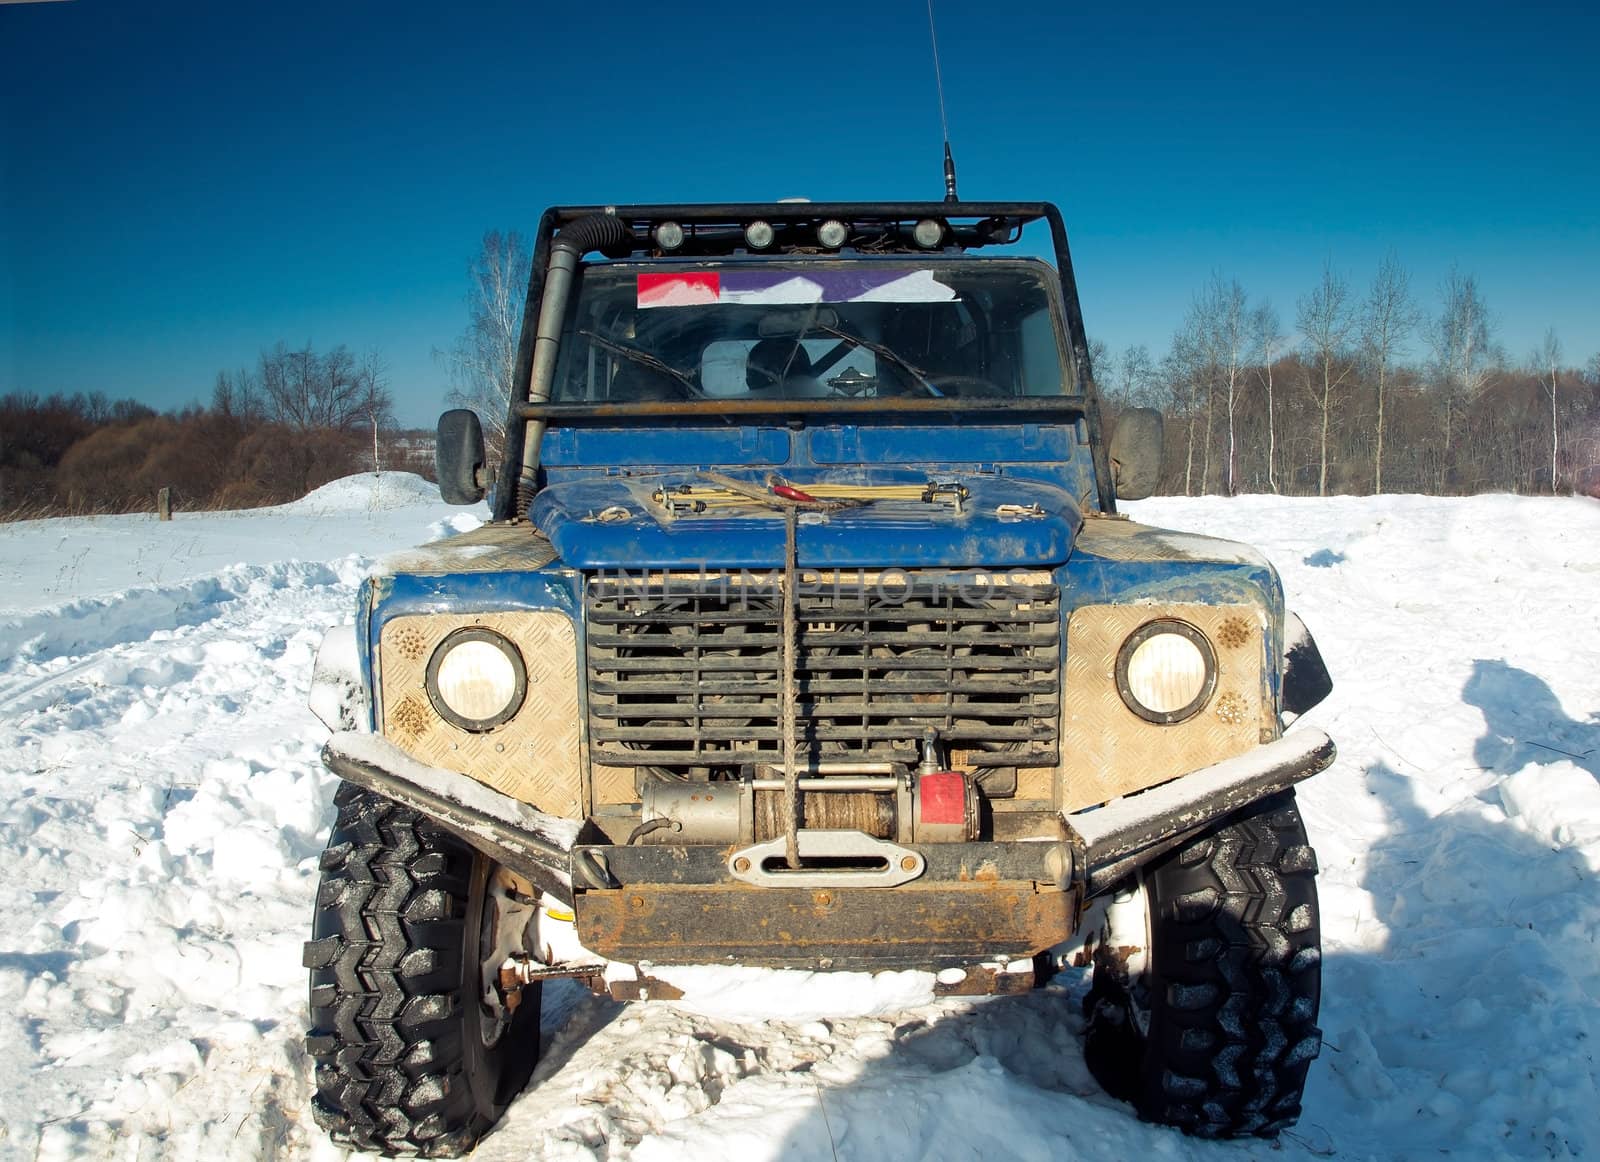 Land Rover Defender 90 suv.
Car on background the Russian winter.